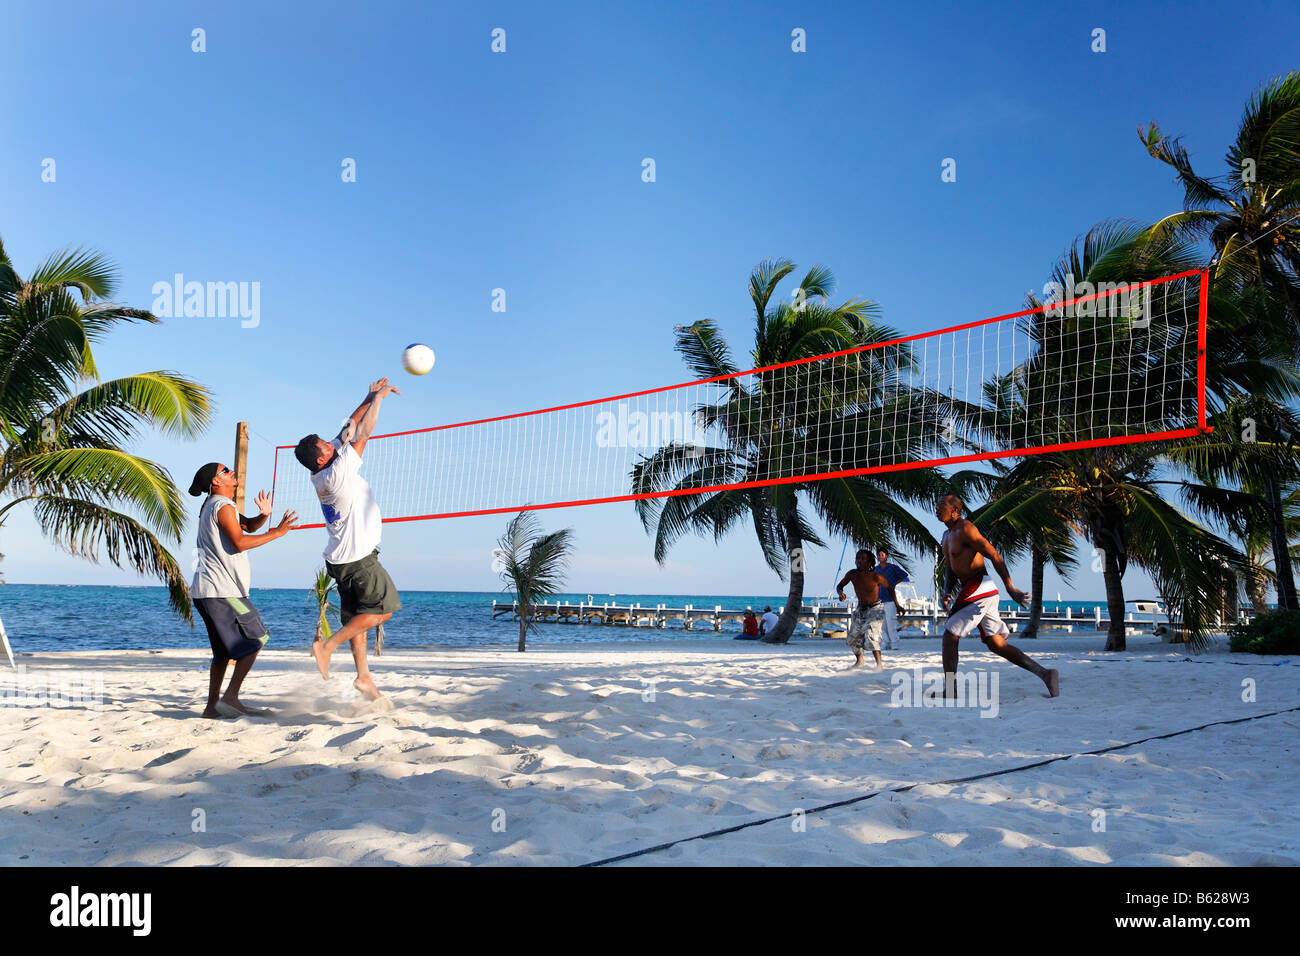 Tourists playing beach volleyball under palm trees, San Pedro, Ambergris Cay Island, Belize, Central America, Caribbean Stock Photo